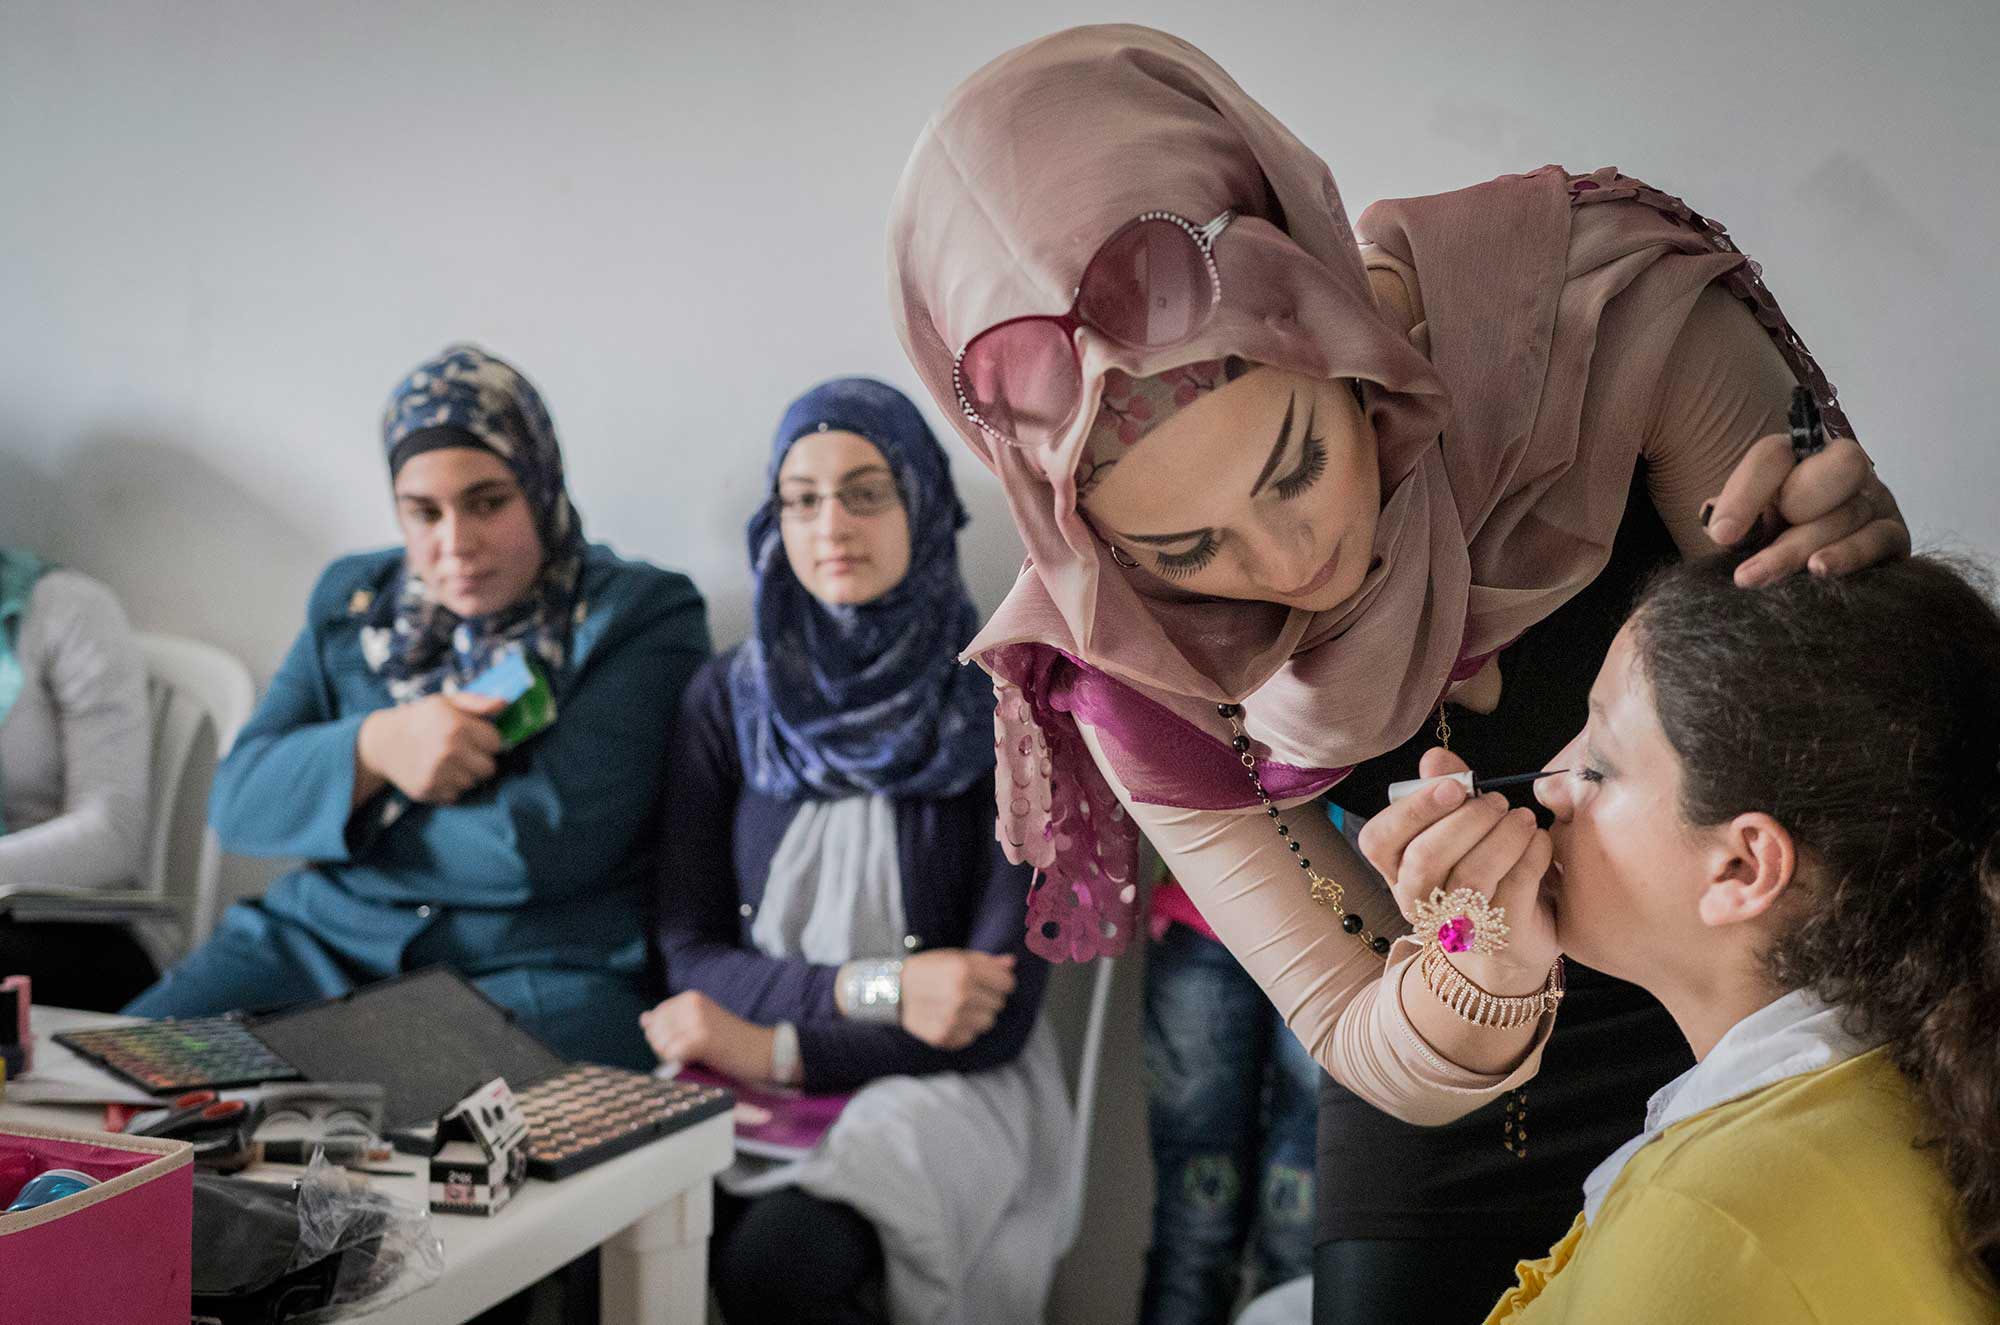 Ms. Fatima teaches a makeup course to Syrian refugees looking for jobs in Lebanon.